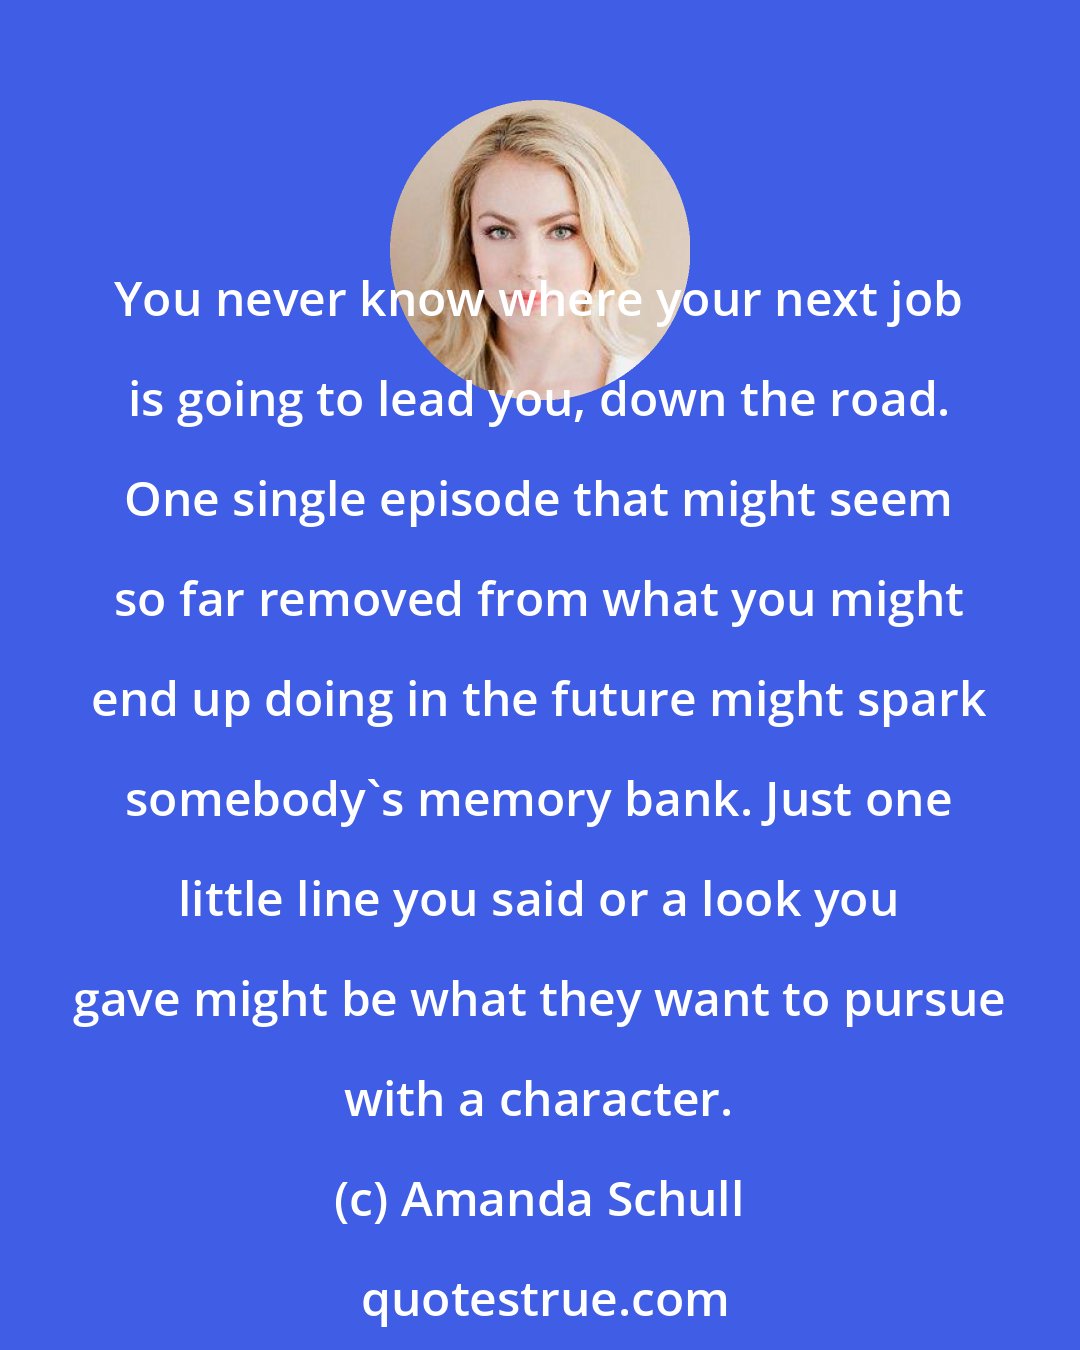 Amanda Schull: You never know where your next job is going to lead you, down the road. One single episode that might seem so far removed from what you might end up doing in the future might spark somebody's memory bank. Just one little line you said or a look you gave might be what they want to pursue with a character.